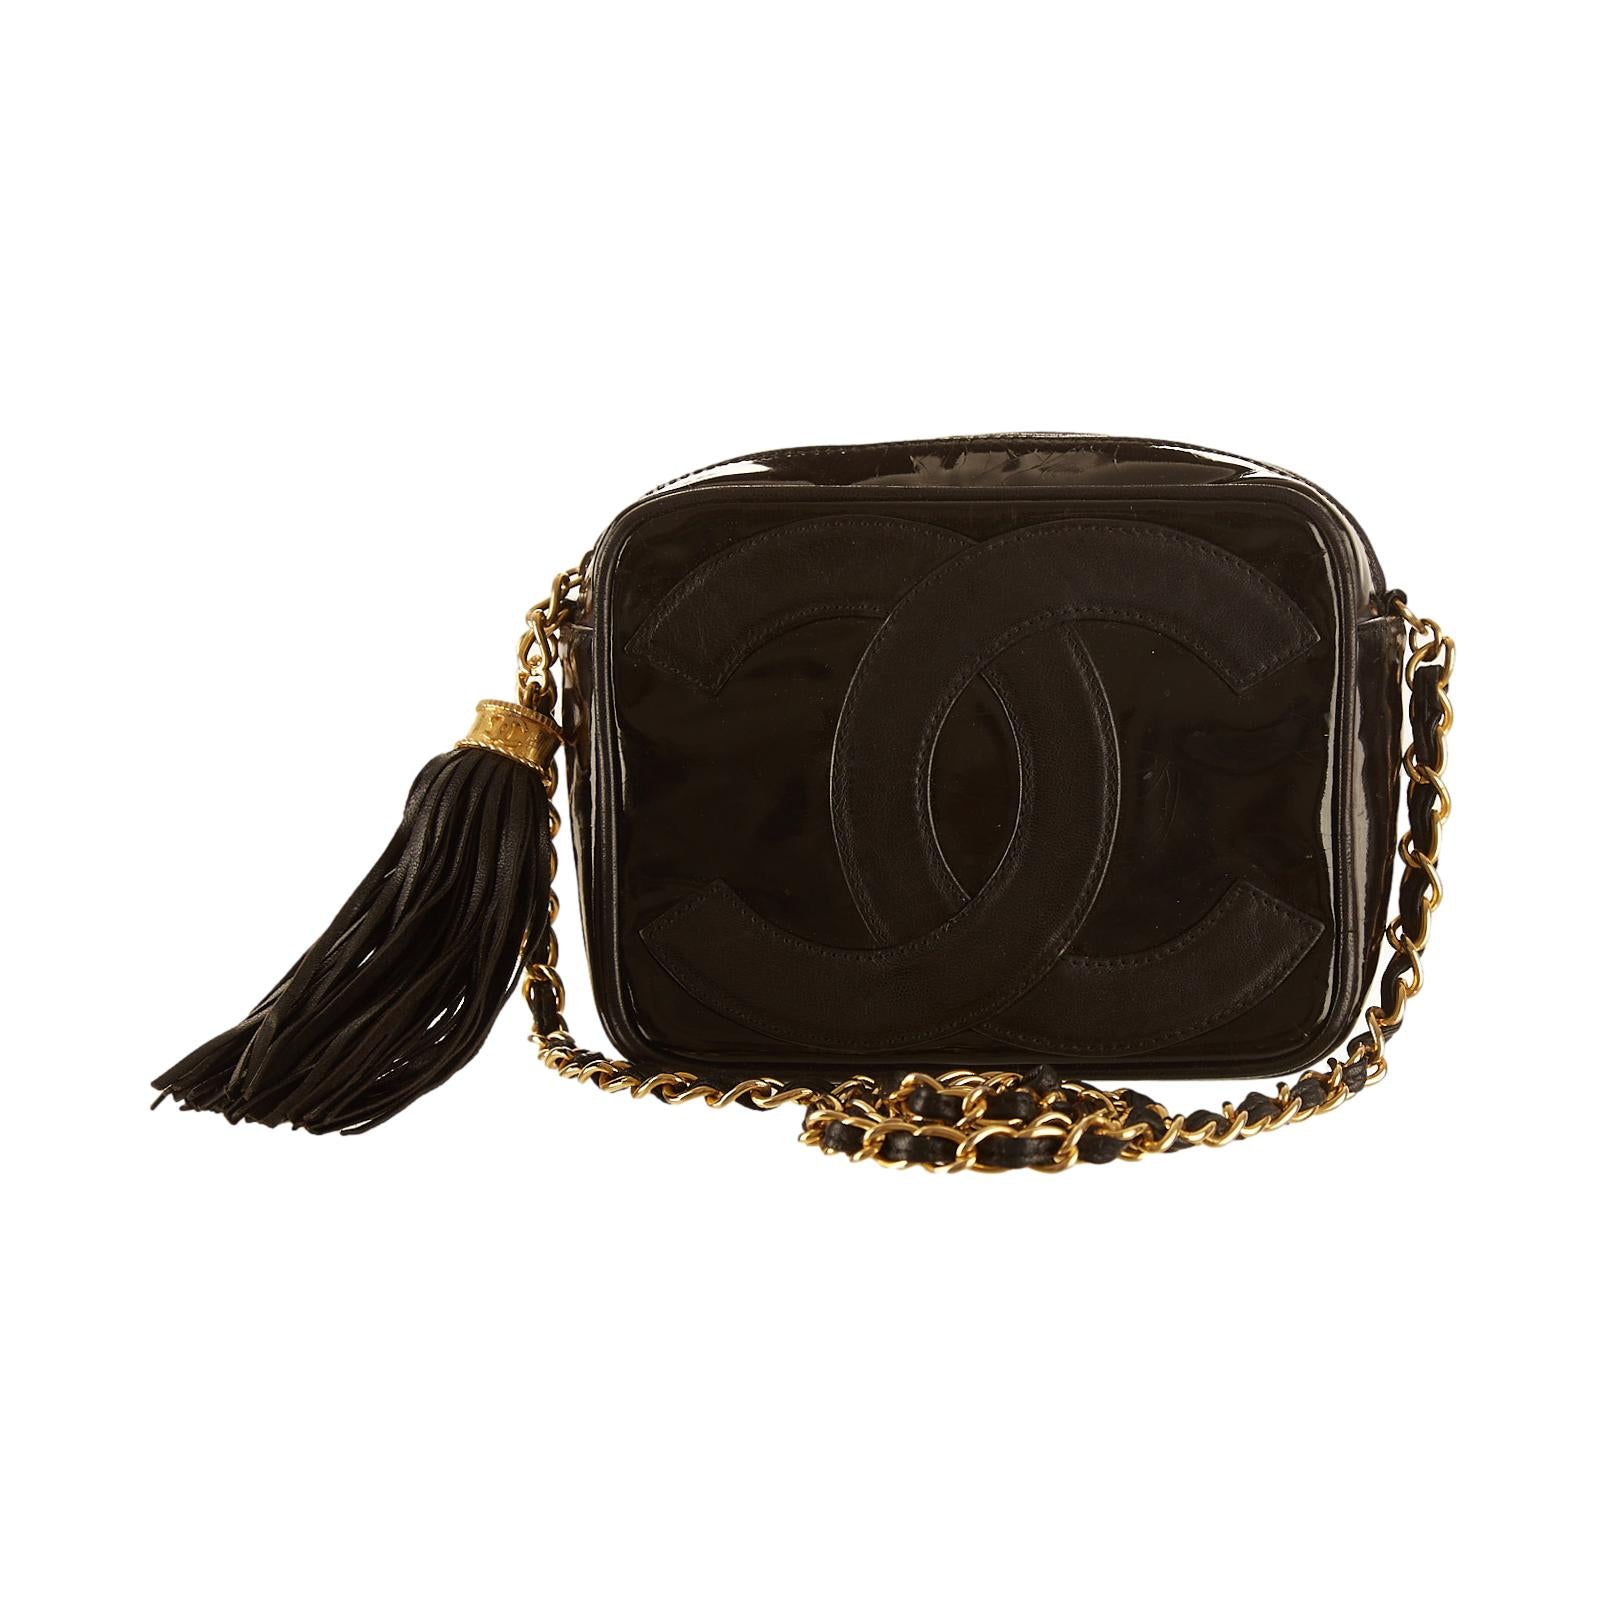 Treasures of NYC - Chanel Black Patent Leather Quilted Belt